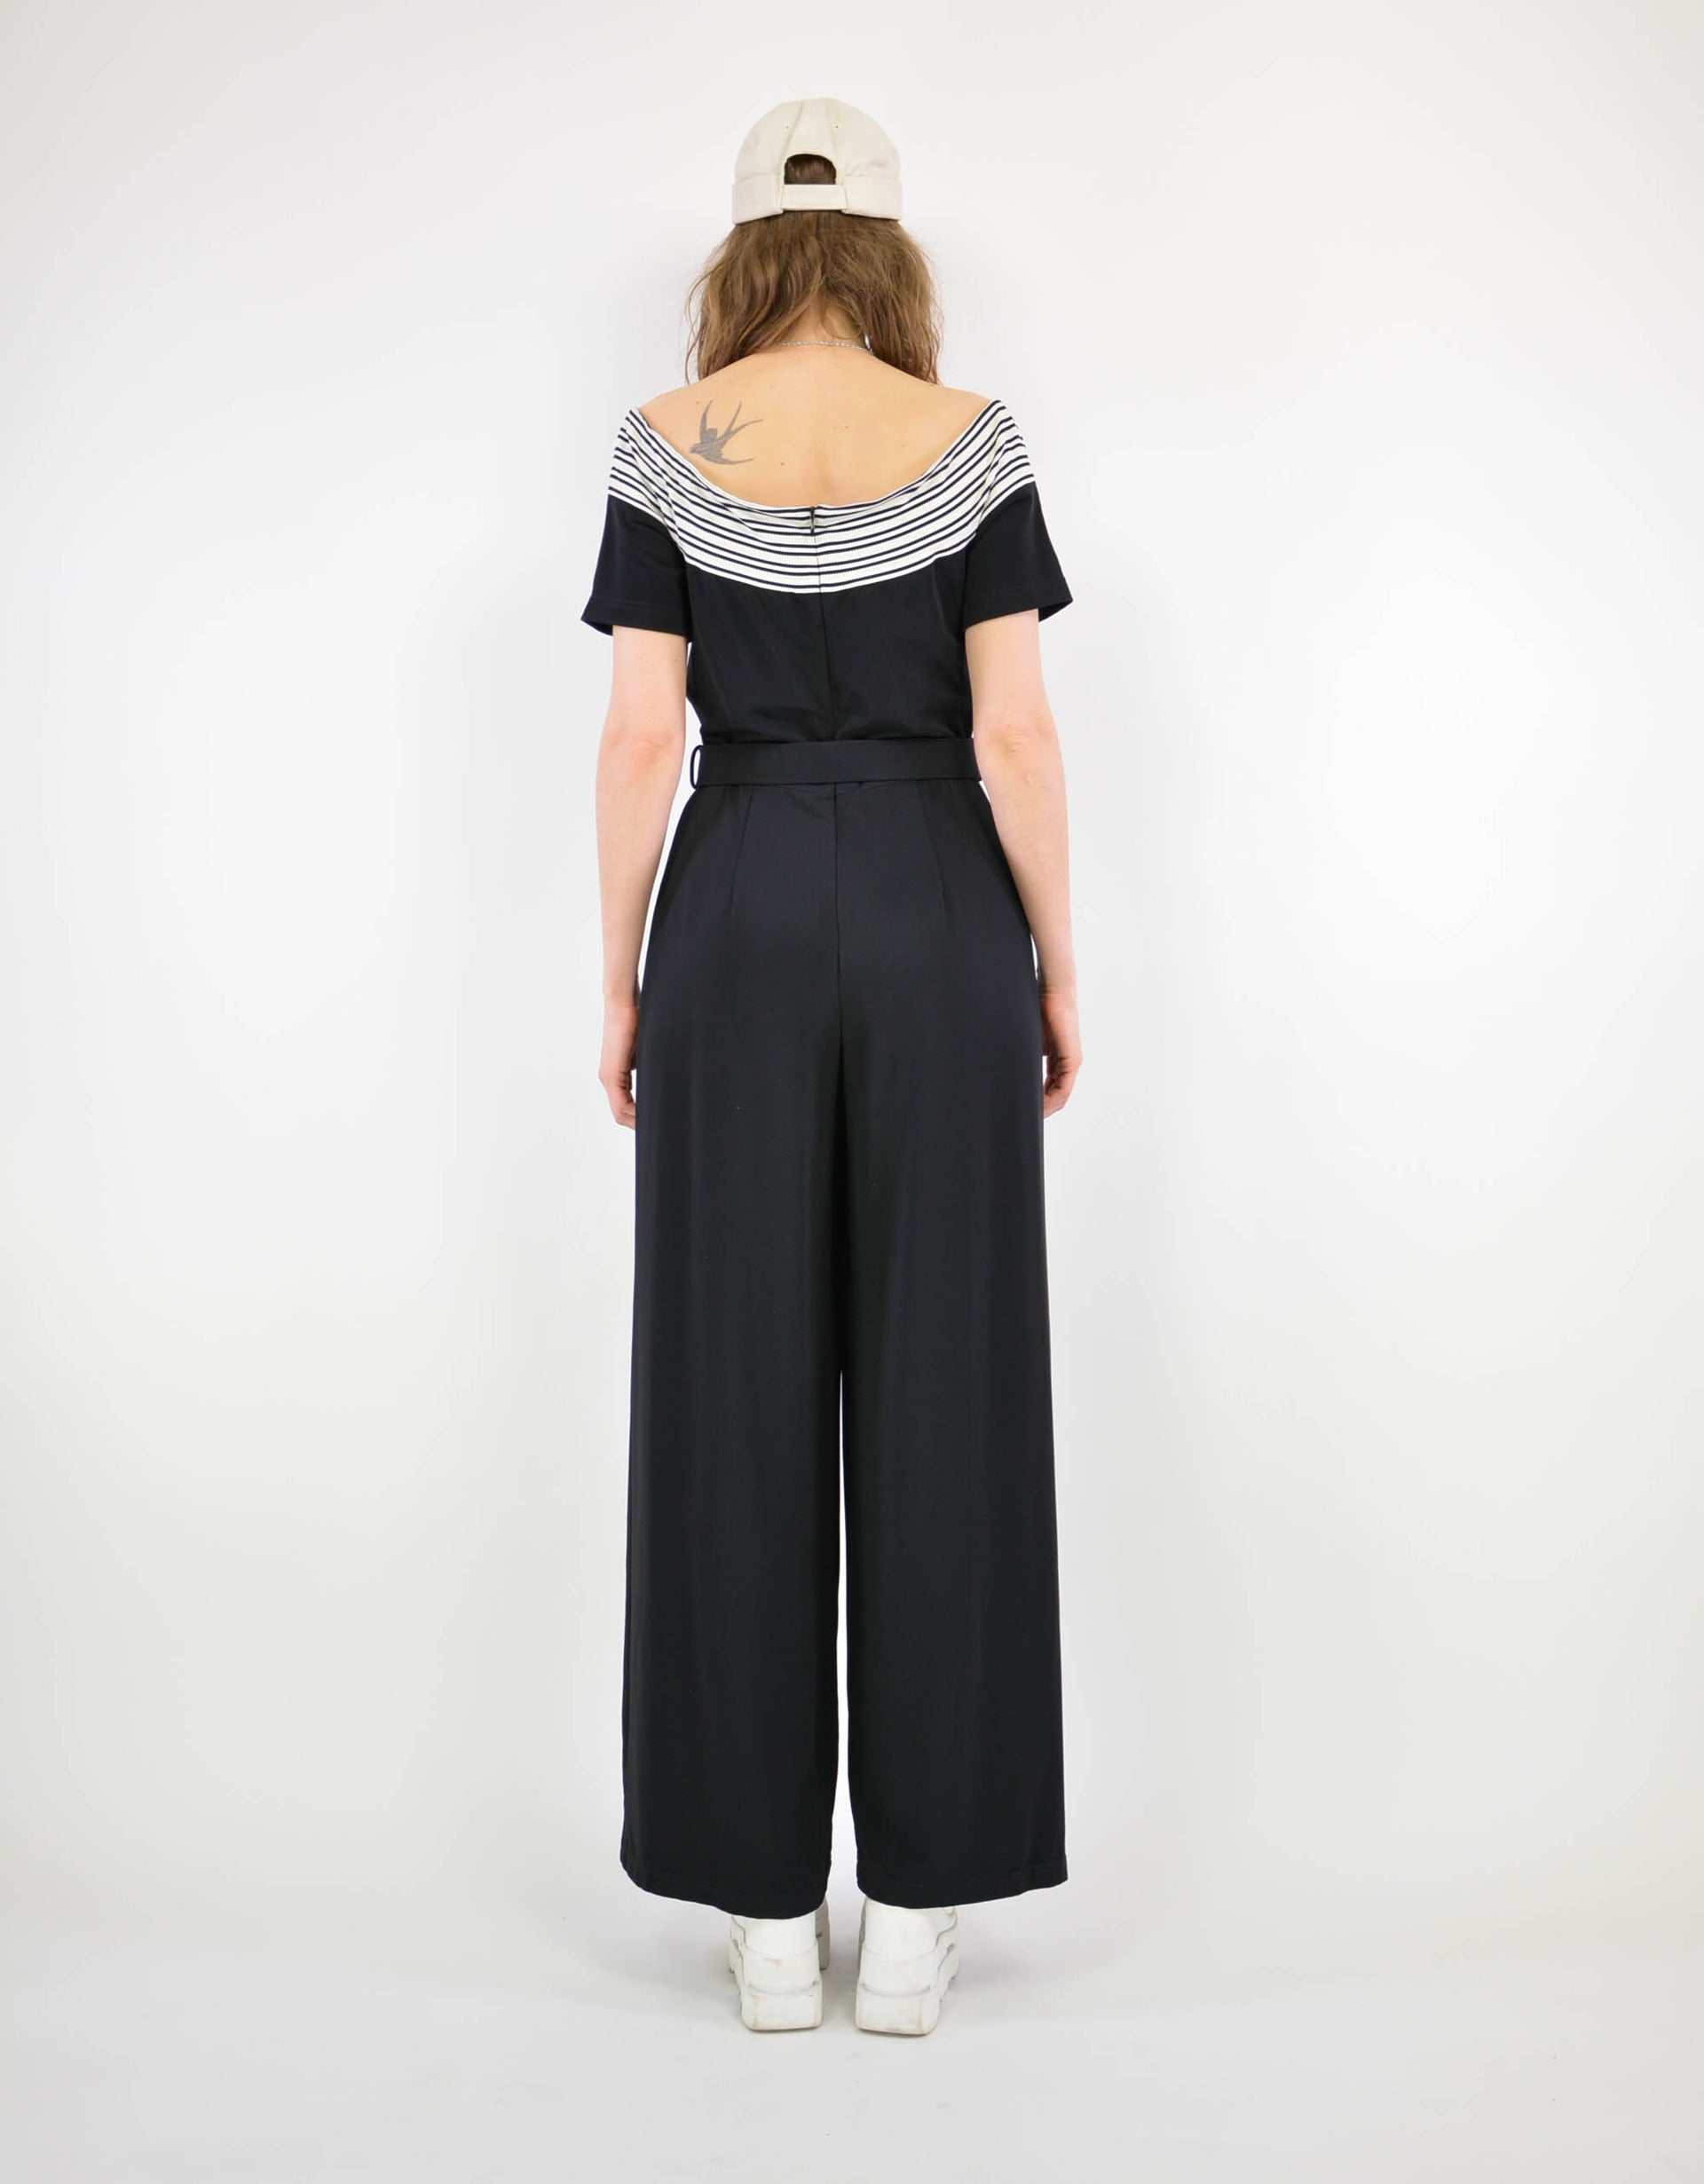 Special overall - PICKNWEIGHT - VINTAGE KILO STORE